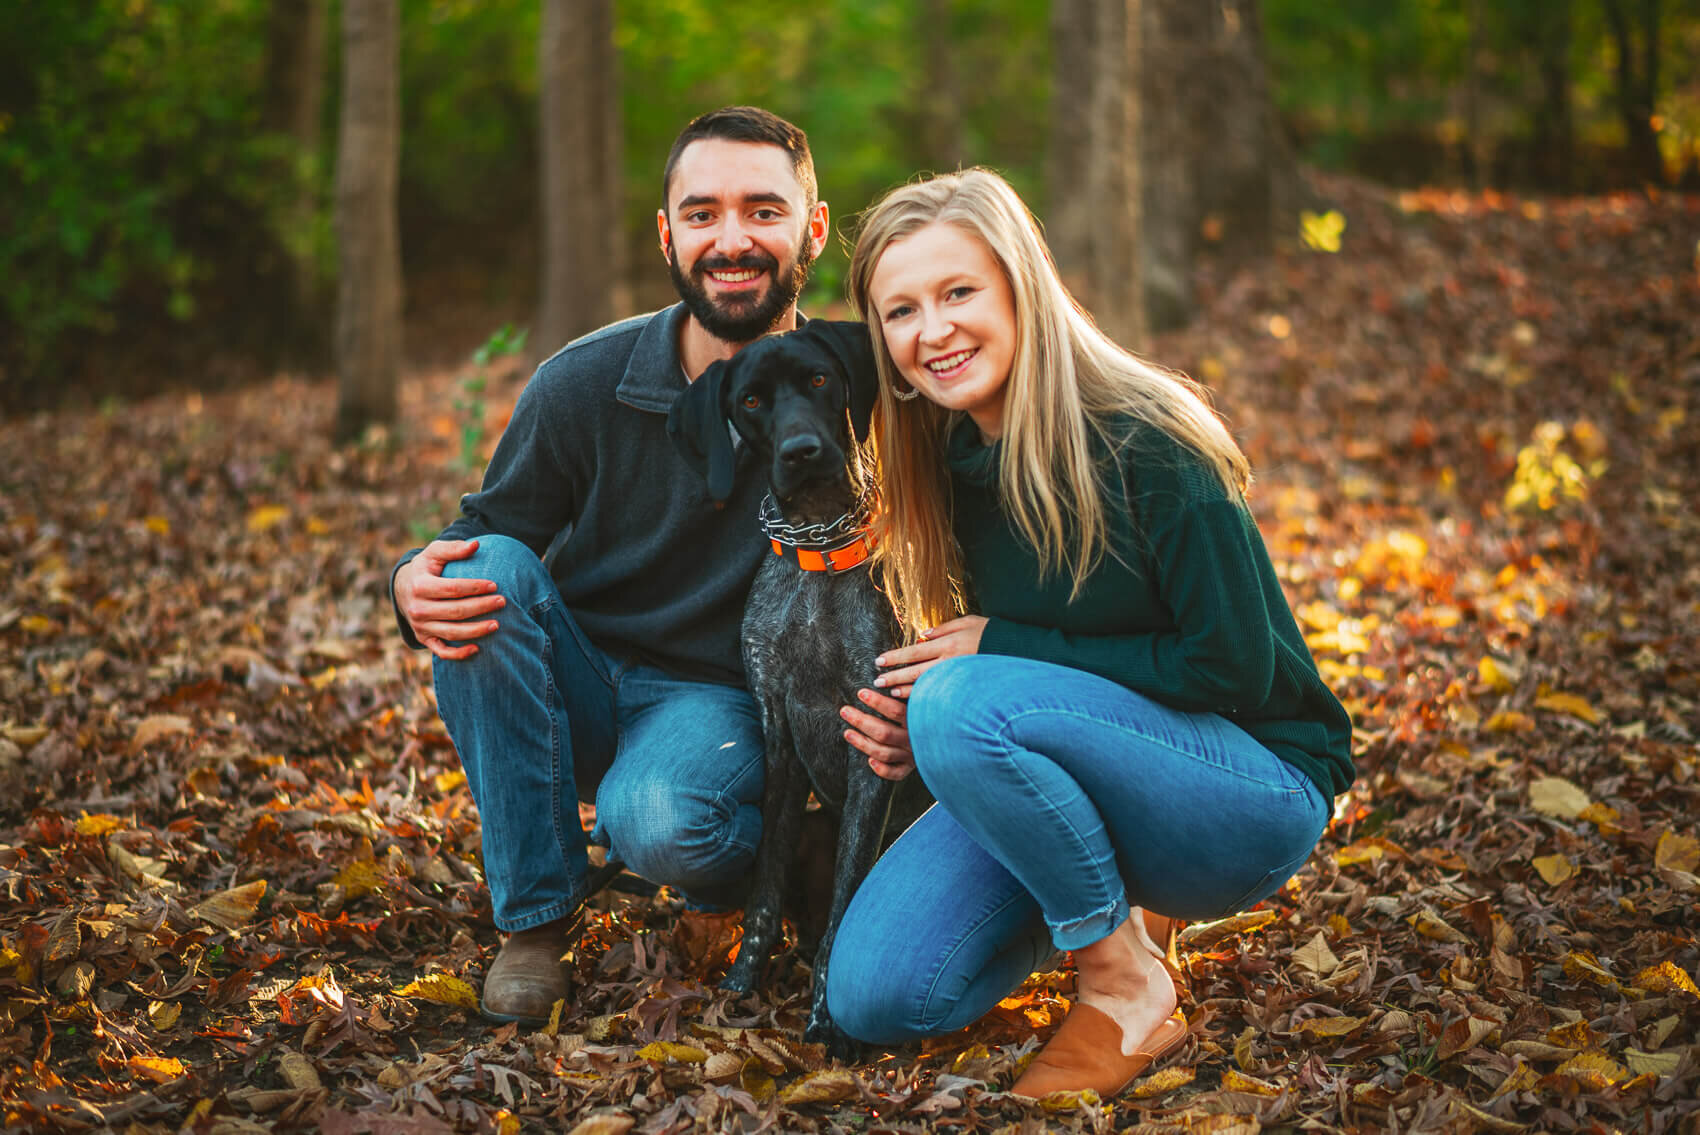  Some of my favorite images from this Highland, Illinois engagement session at Silver Lake Park. 